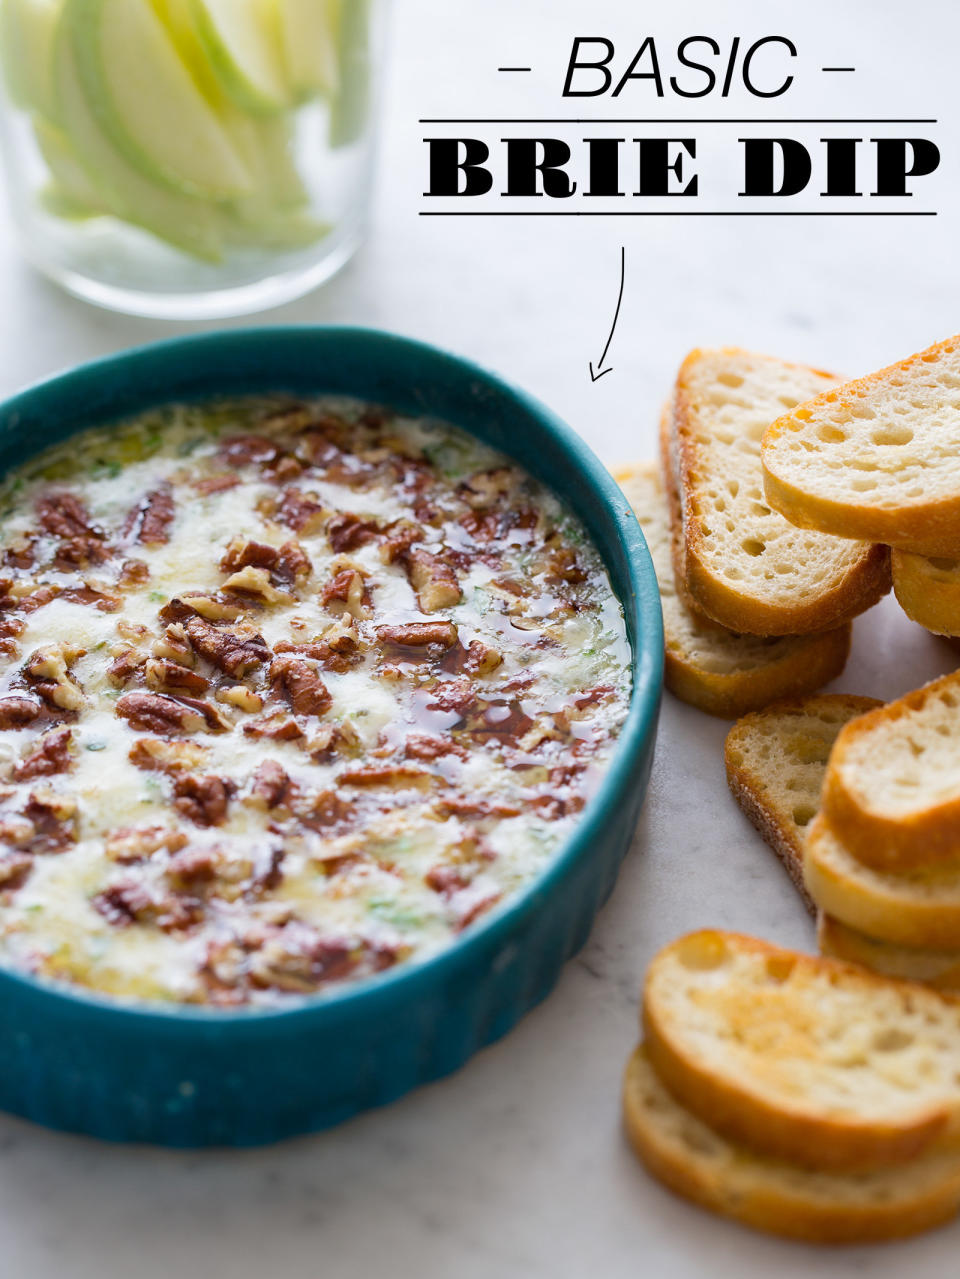 <strong>Get the <a href="http://www.spoonforkbacon.com/2013/09/basic-brie-dip/" target="_blank">Basic Baked Brie dip recipe</a> from Spoon Fork Bacon</strong>